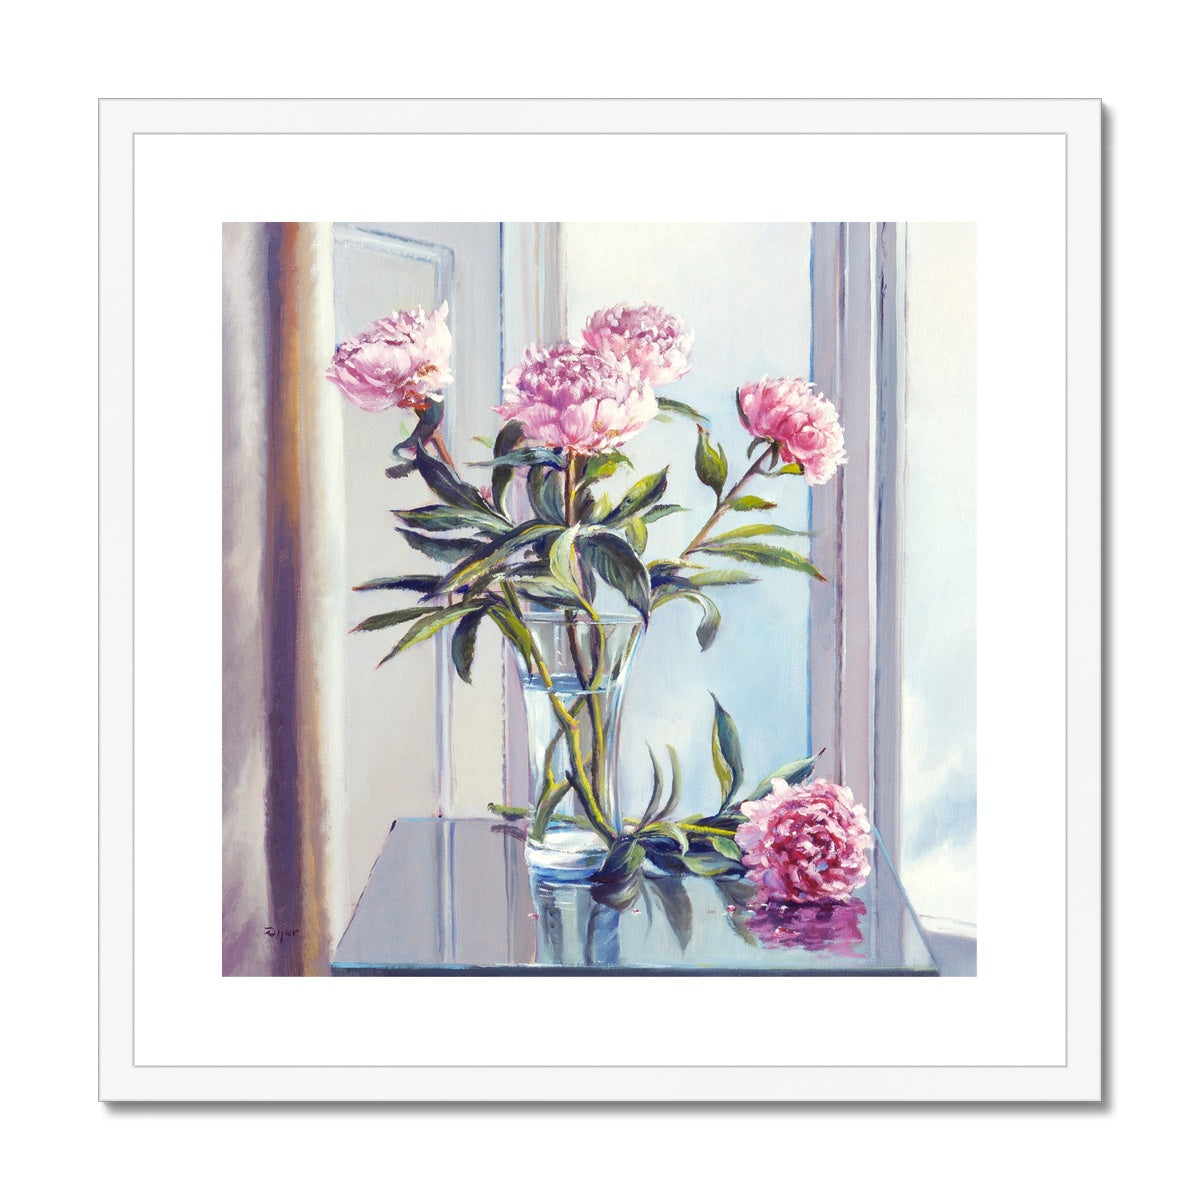 Ted Dyer Framed Open Edition Cornish Fine Art Print. 'Pink Peonies'. Cornwall Art Gallery